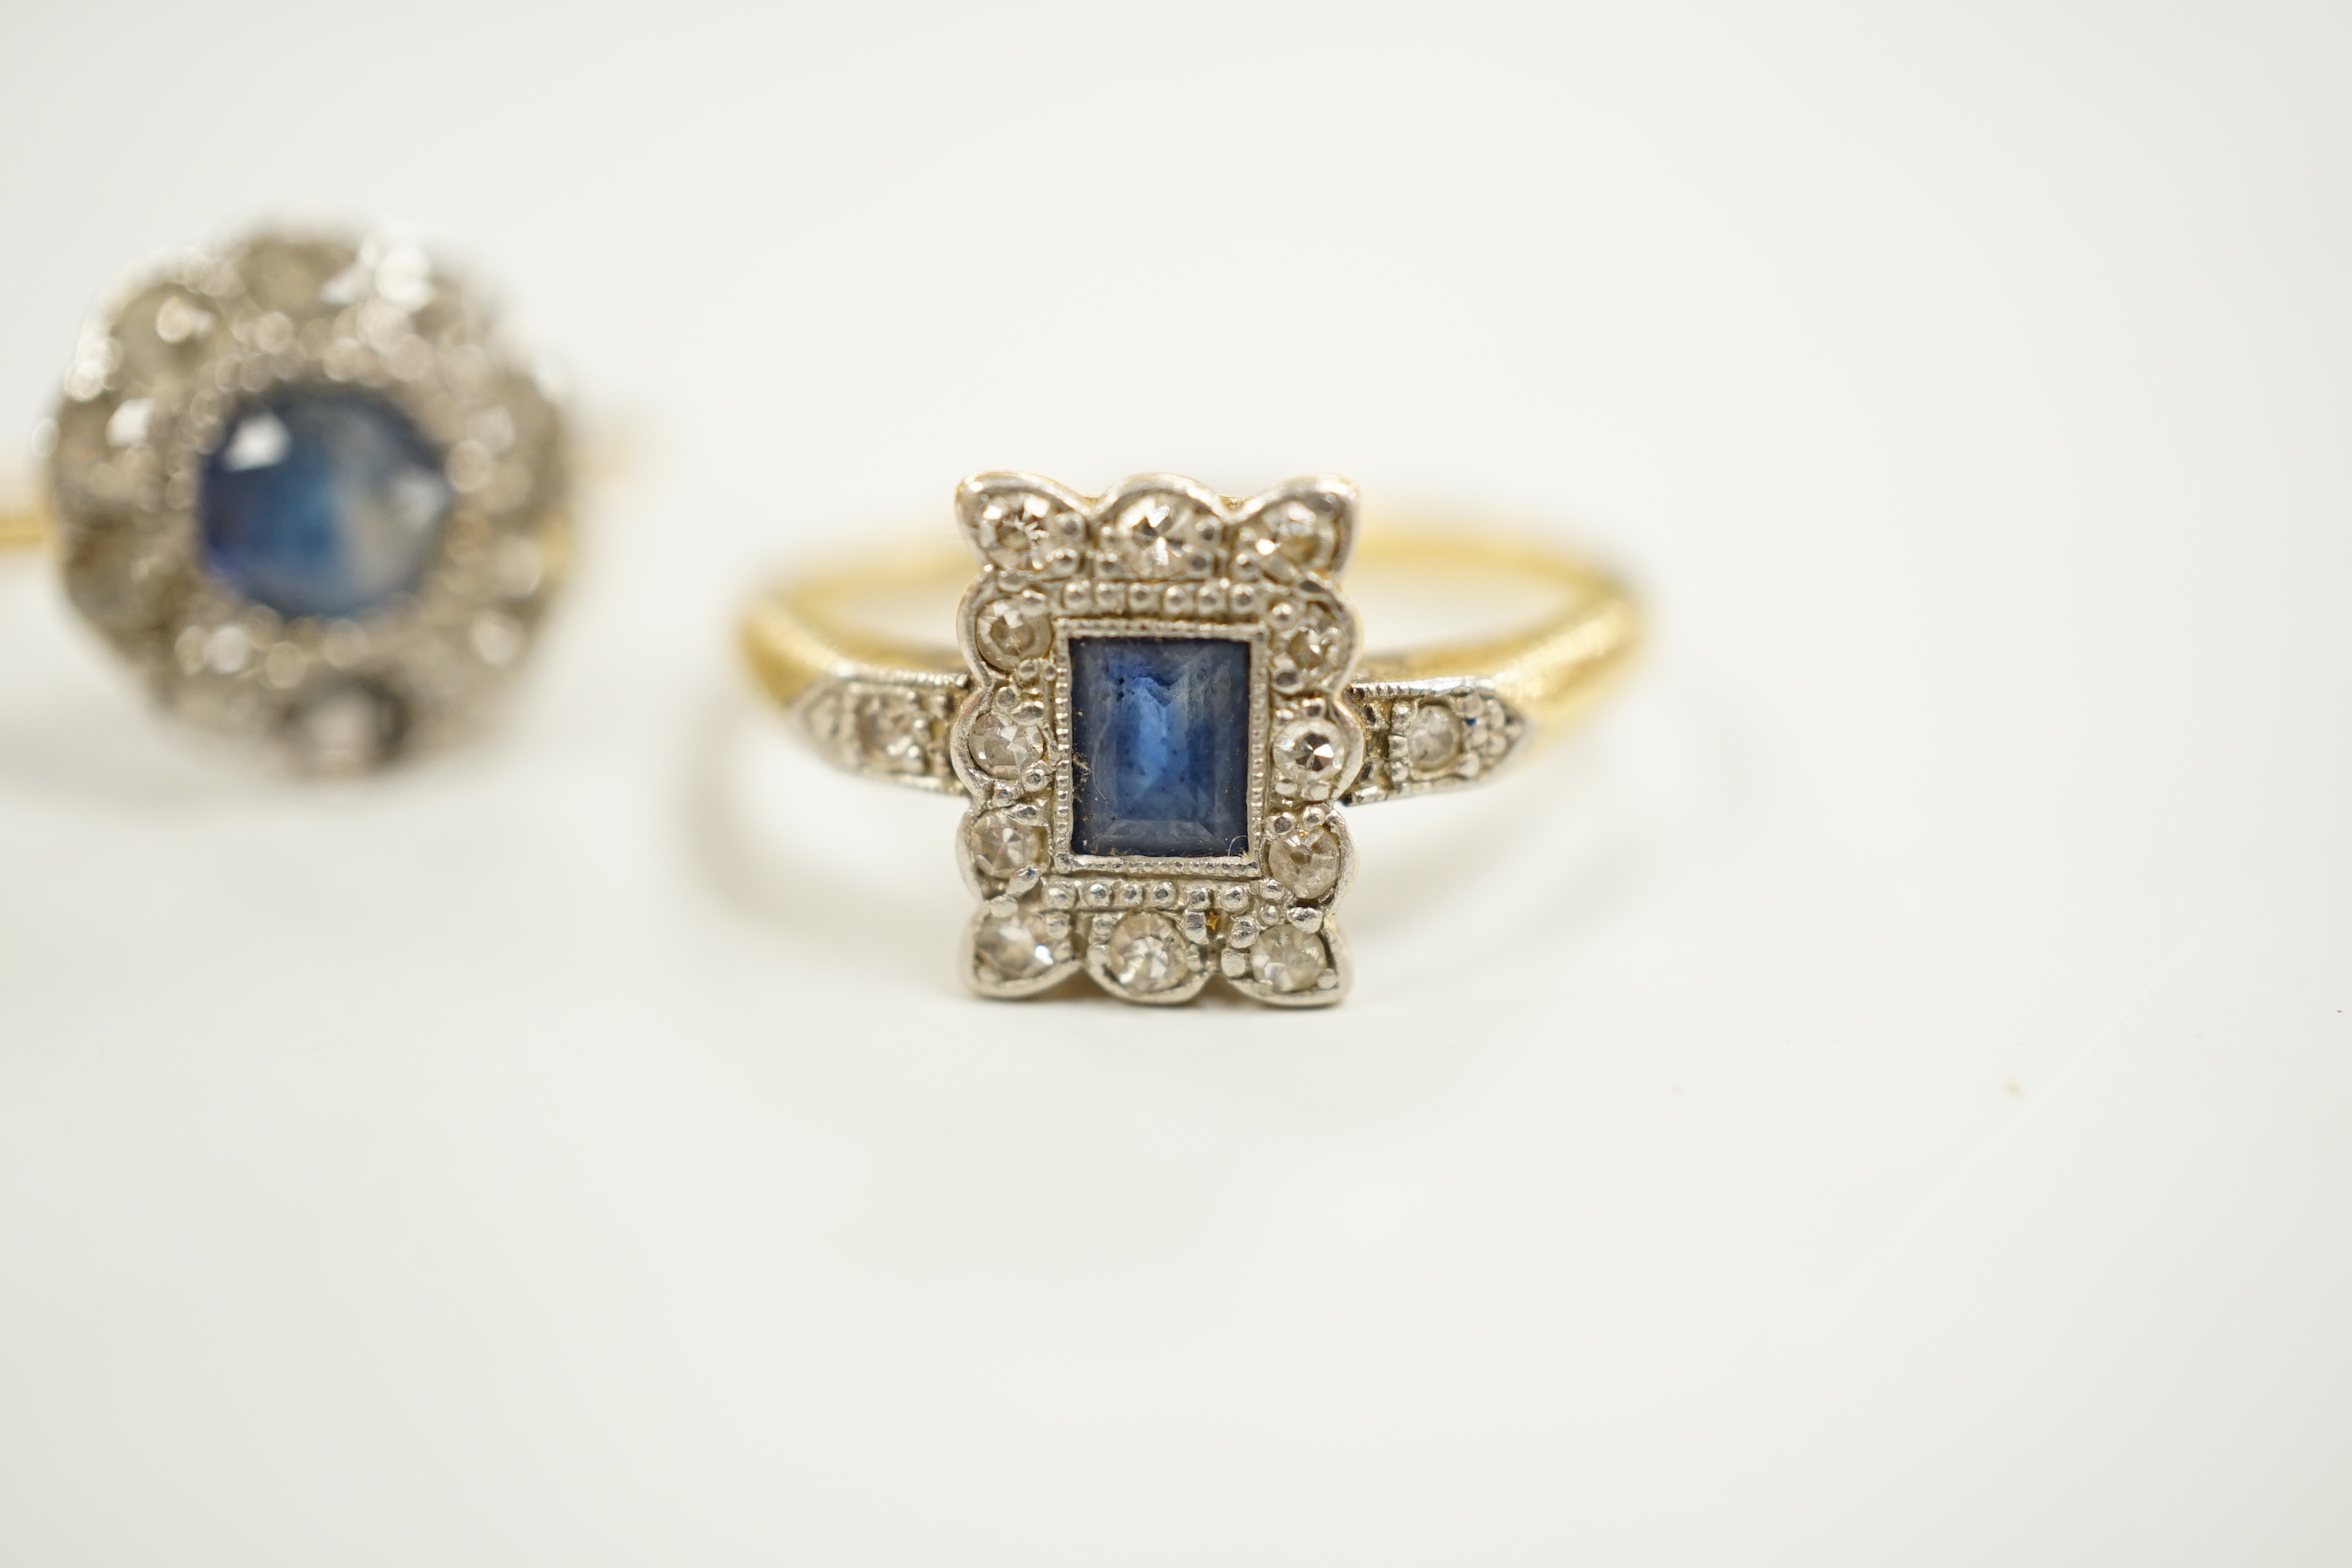 Two 1920's 18ct, sapphire and diamond cluster set dress rings, (one with misshapen shank and missing a diamond), gross weight 6.1 grams.